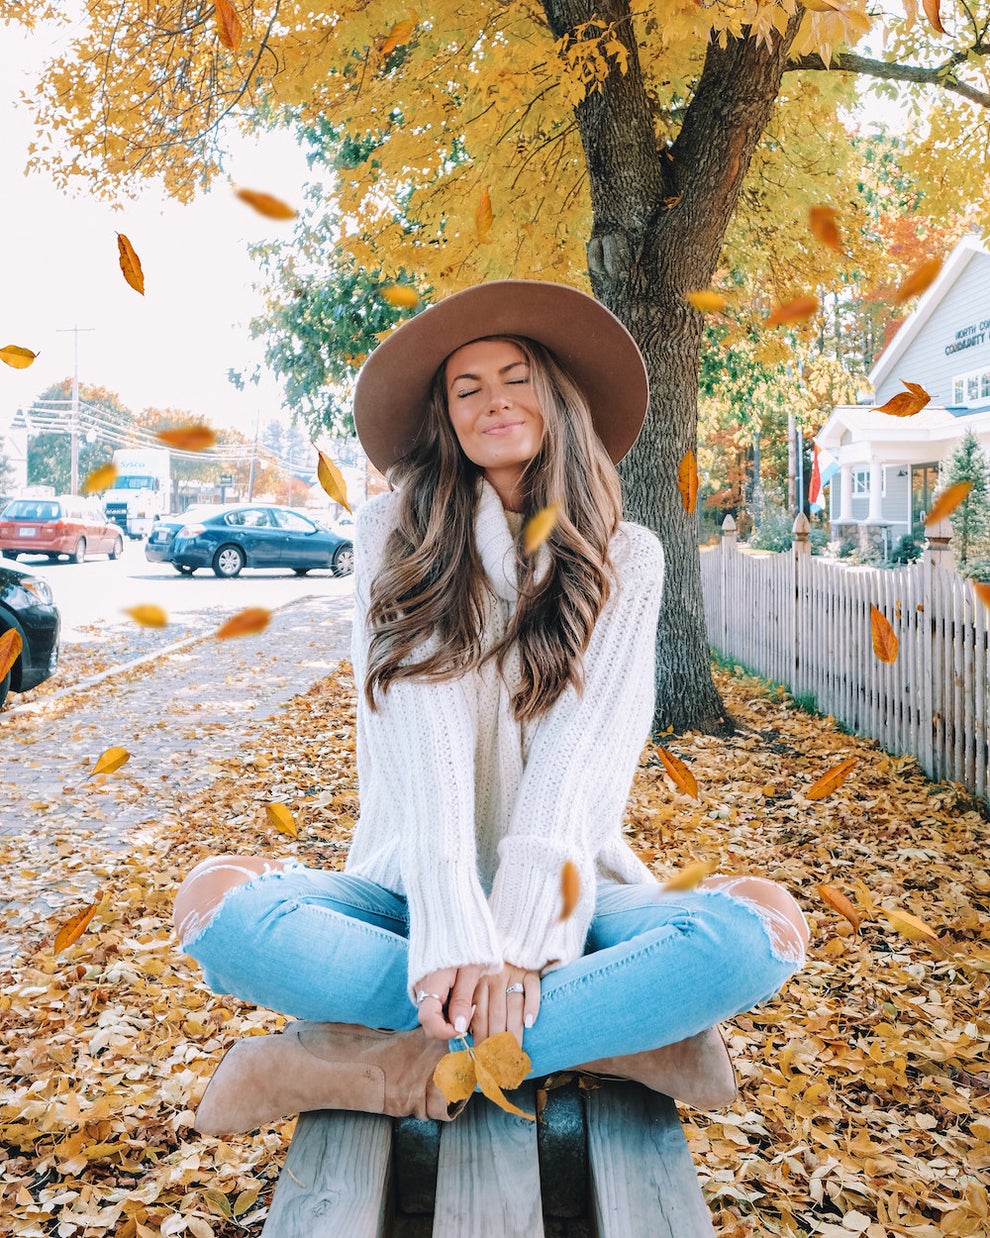 Christian Girl Autumn was once a joke and has now become a seasonal  inspiration of coziness